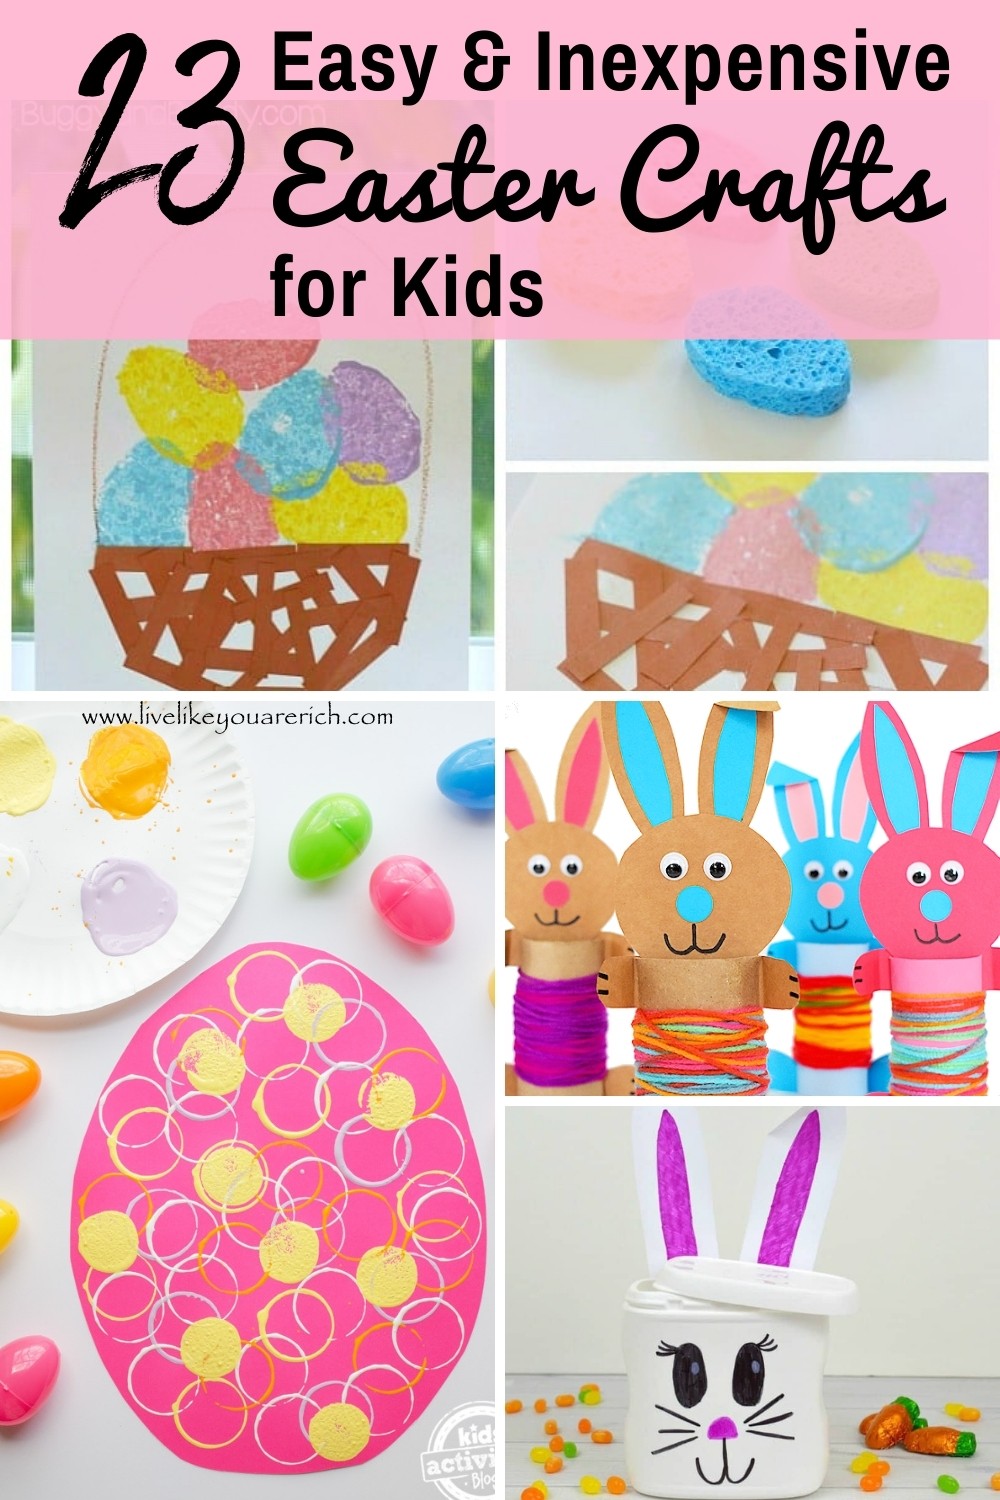 Easter is just around the corner. Looking for easy and inexpensive crafts you can do with your kids this Easter? Here are 23 easy and inexpensive Easter crafts for kids. 